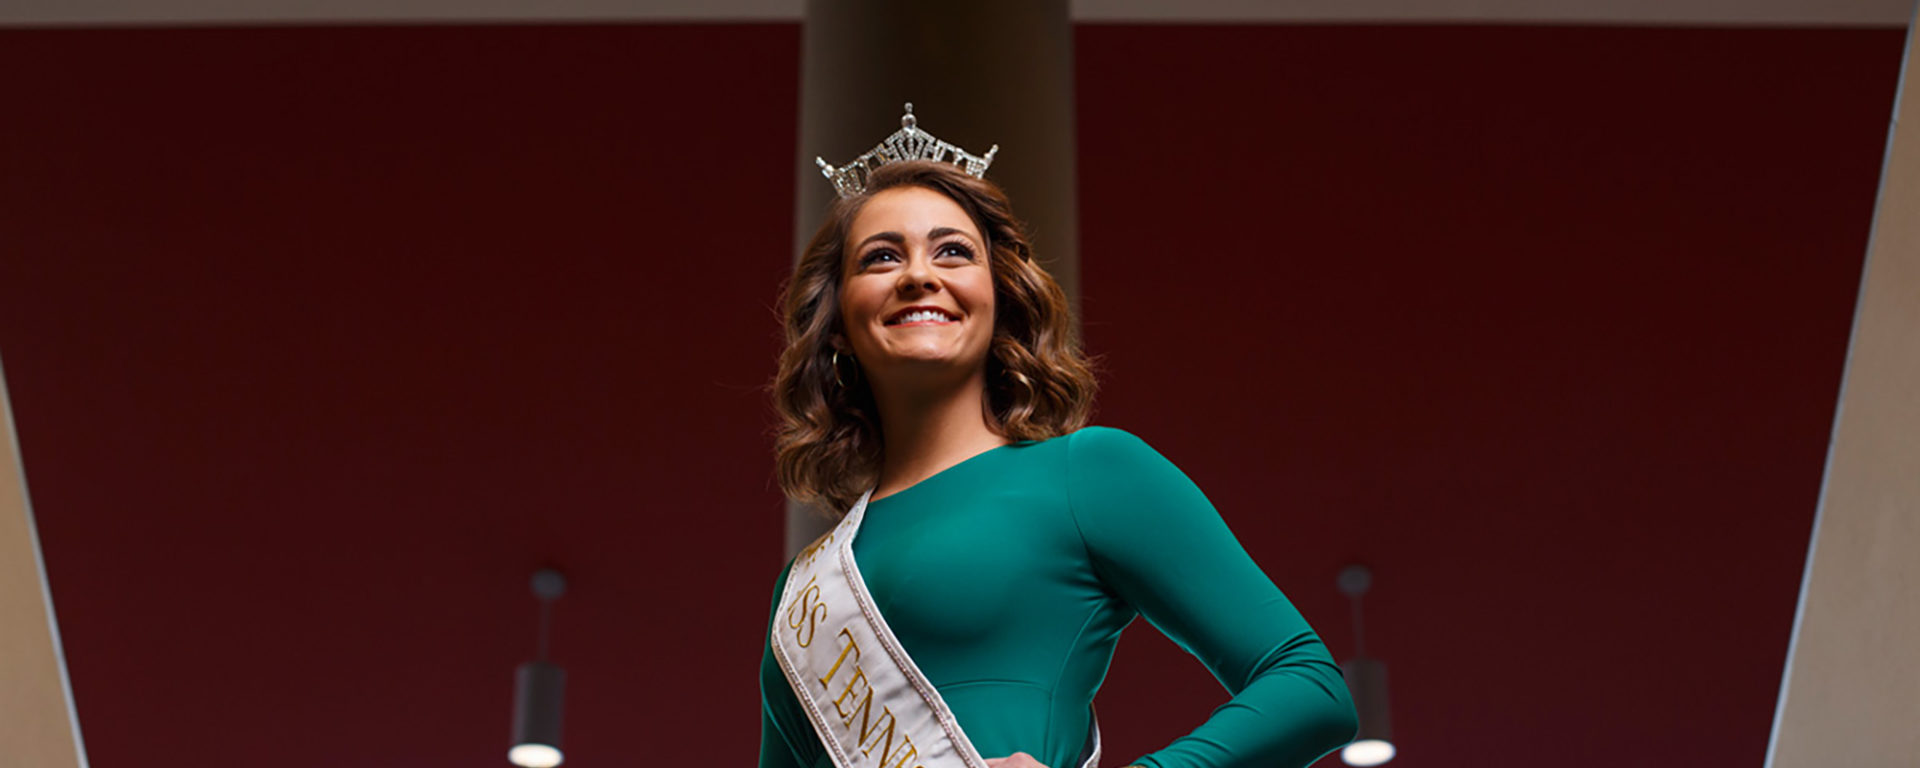 Hannah Robison wearing her Miss Tennessee crown